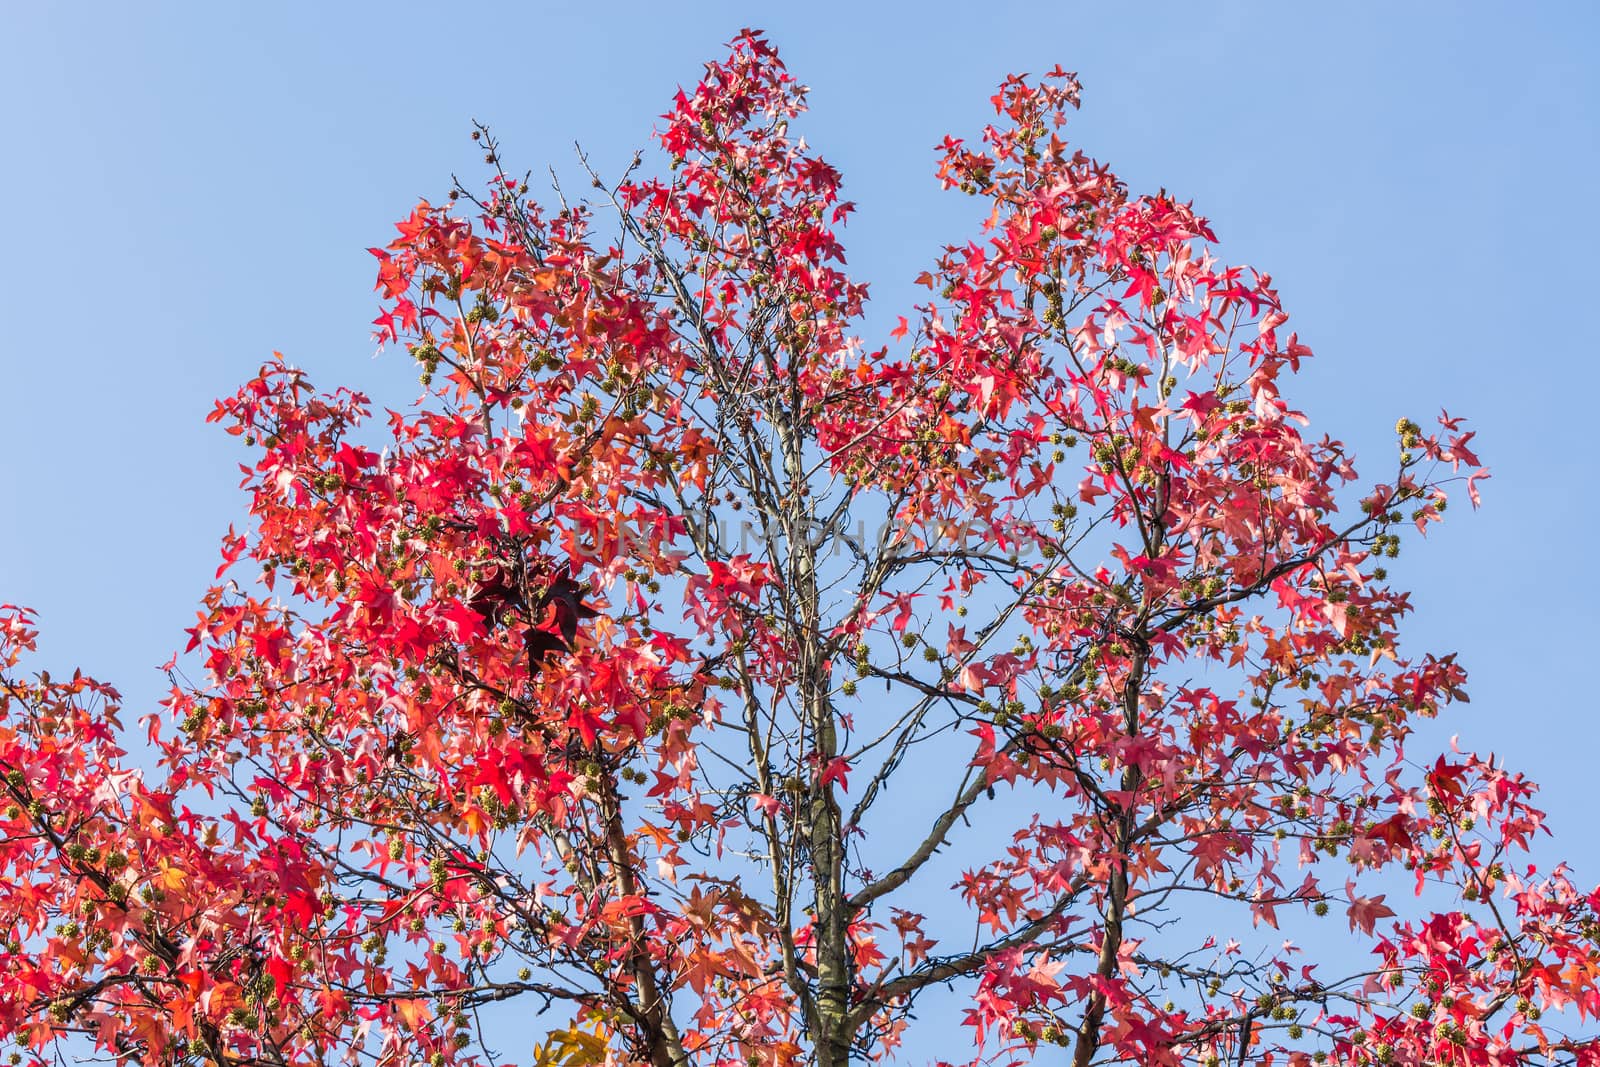 Autumn tree in November in sunny weather.       by JFsPic